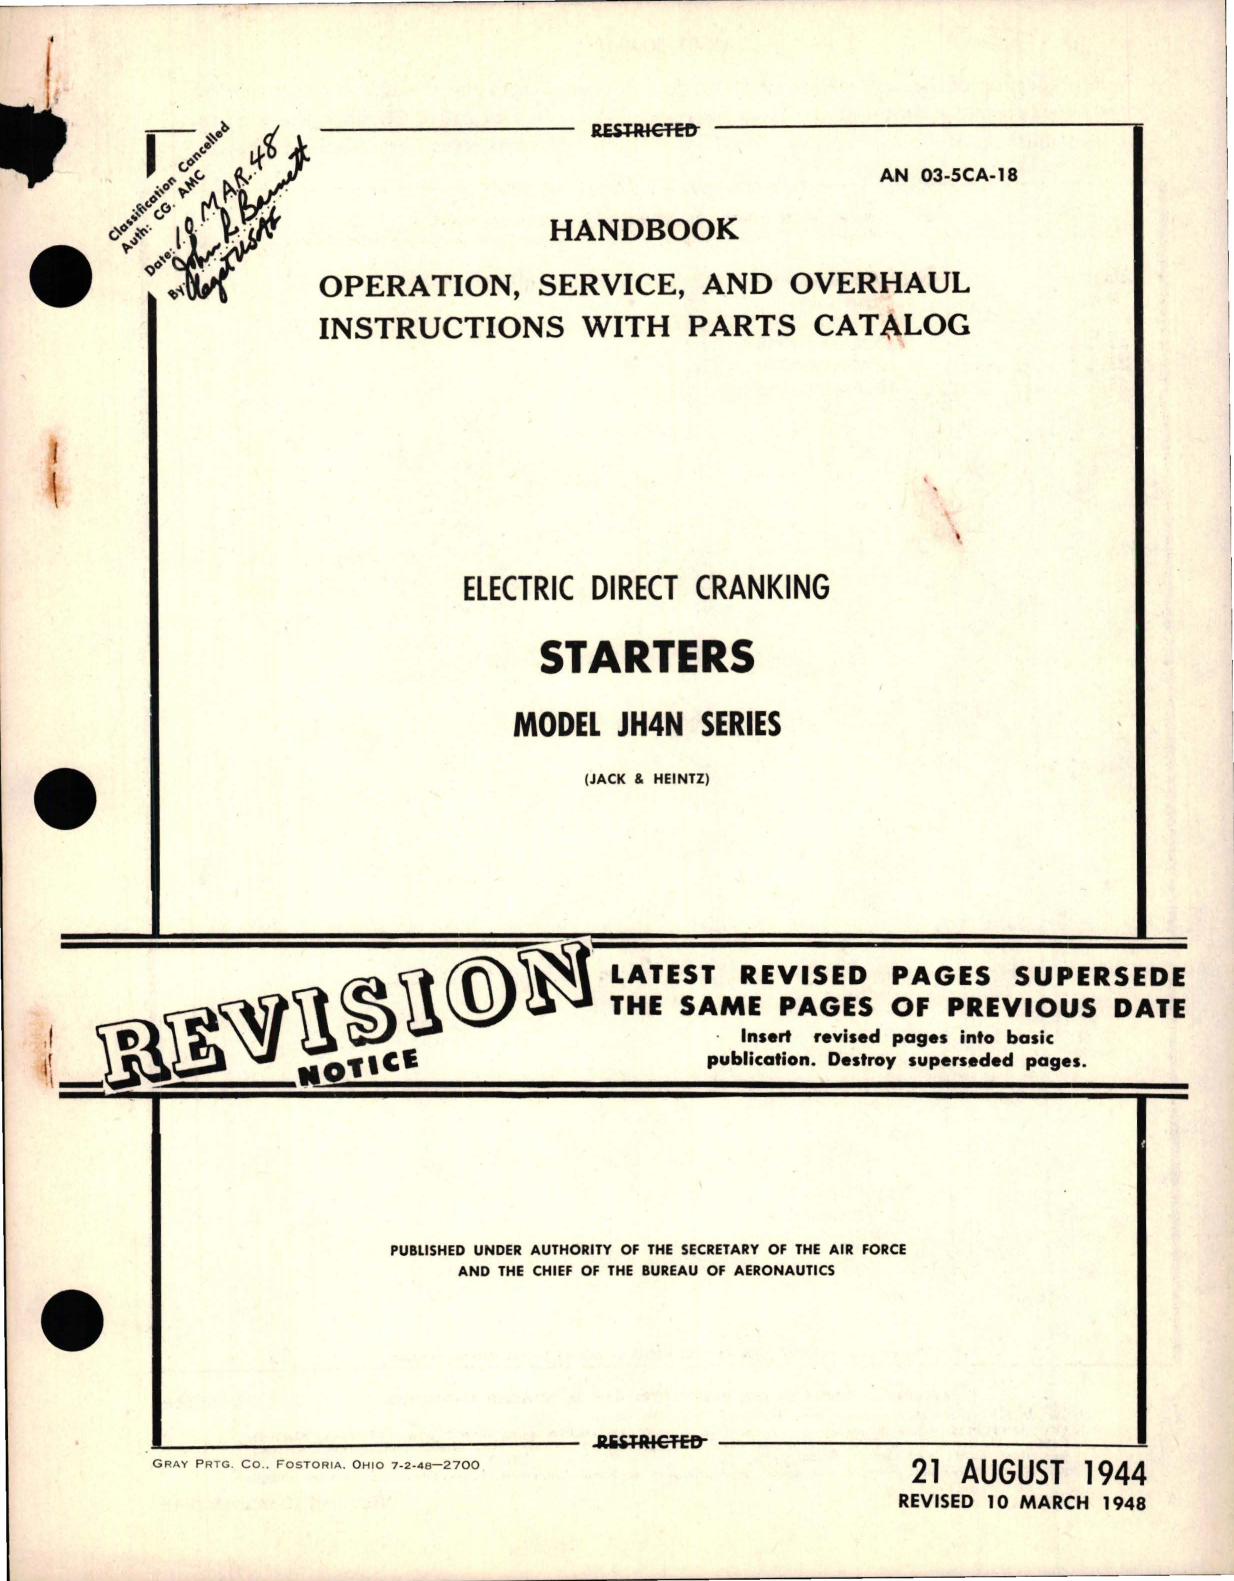 Sample page 1 from AirCorps Library document: Operation, Service, Overhaul Instructions with Parts Catalog for Electric Direct Cranking Starters - Model JH4N Series